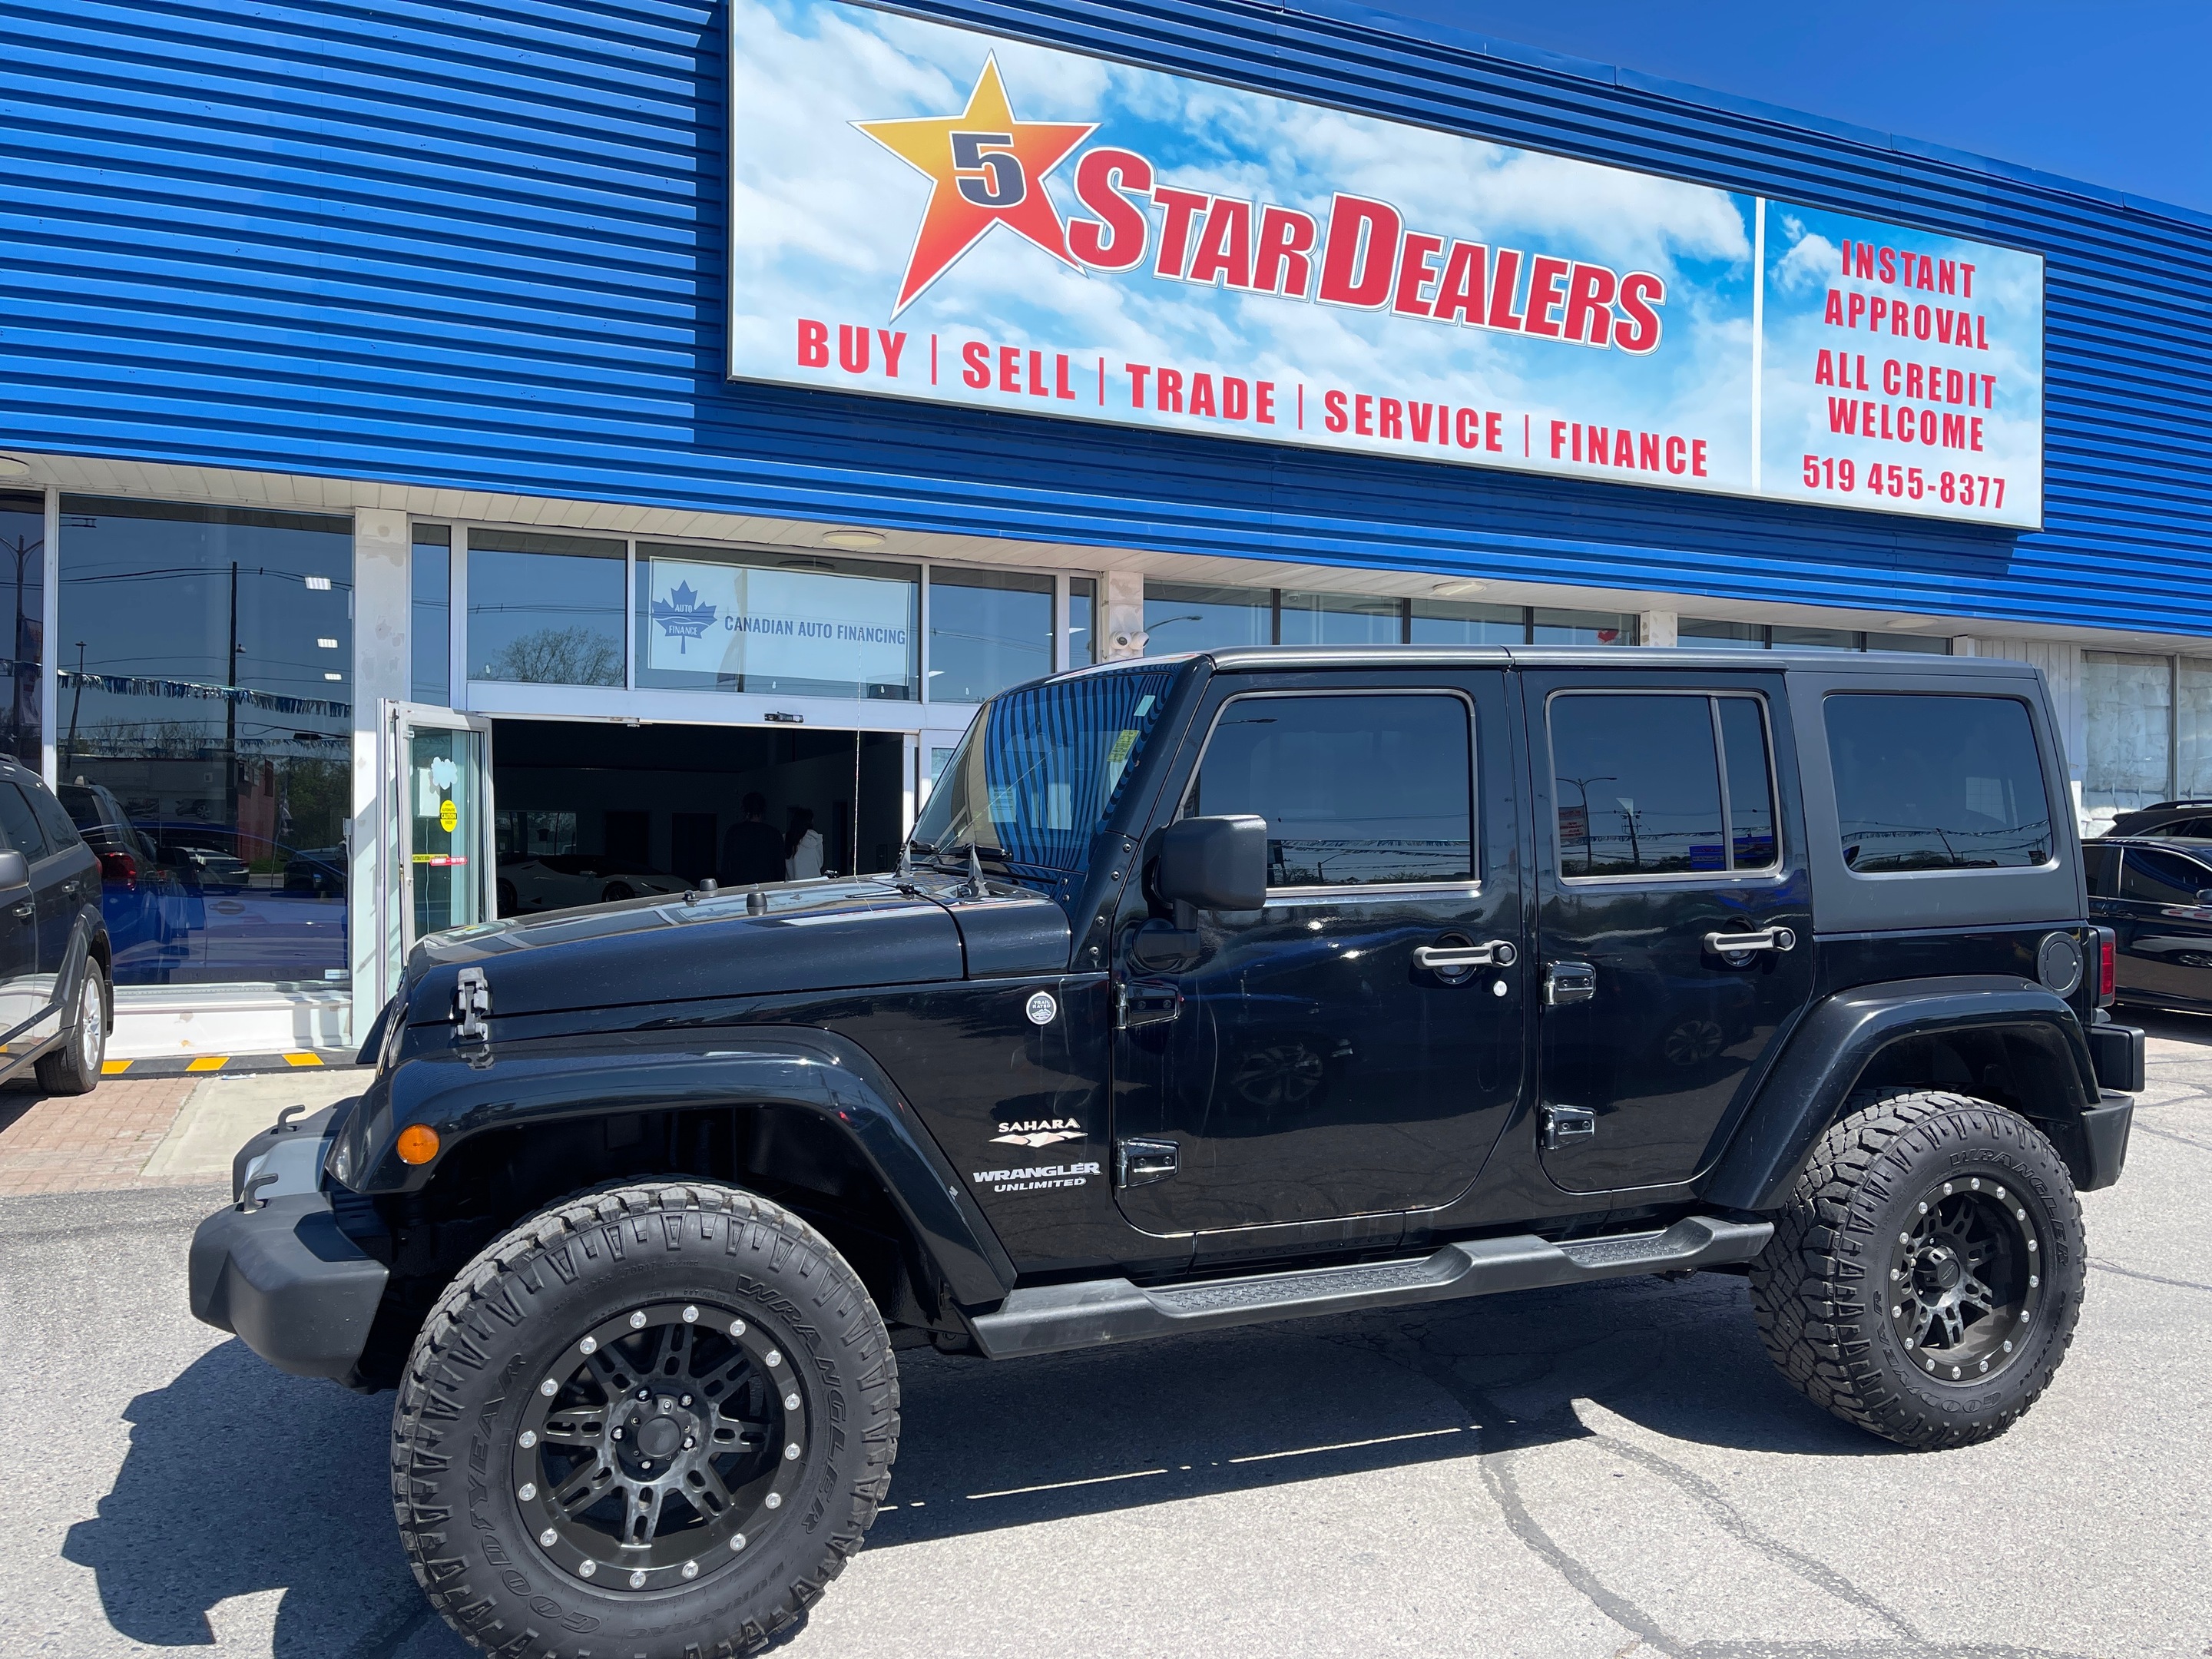 2013 Jeep WRANGLER UNLIMITED 4WD 4dr Sahara LOADED MINT! WE FINANCE ALL CREDIT!